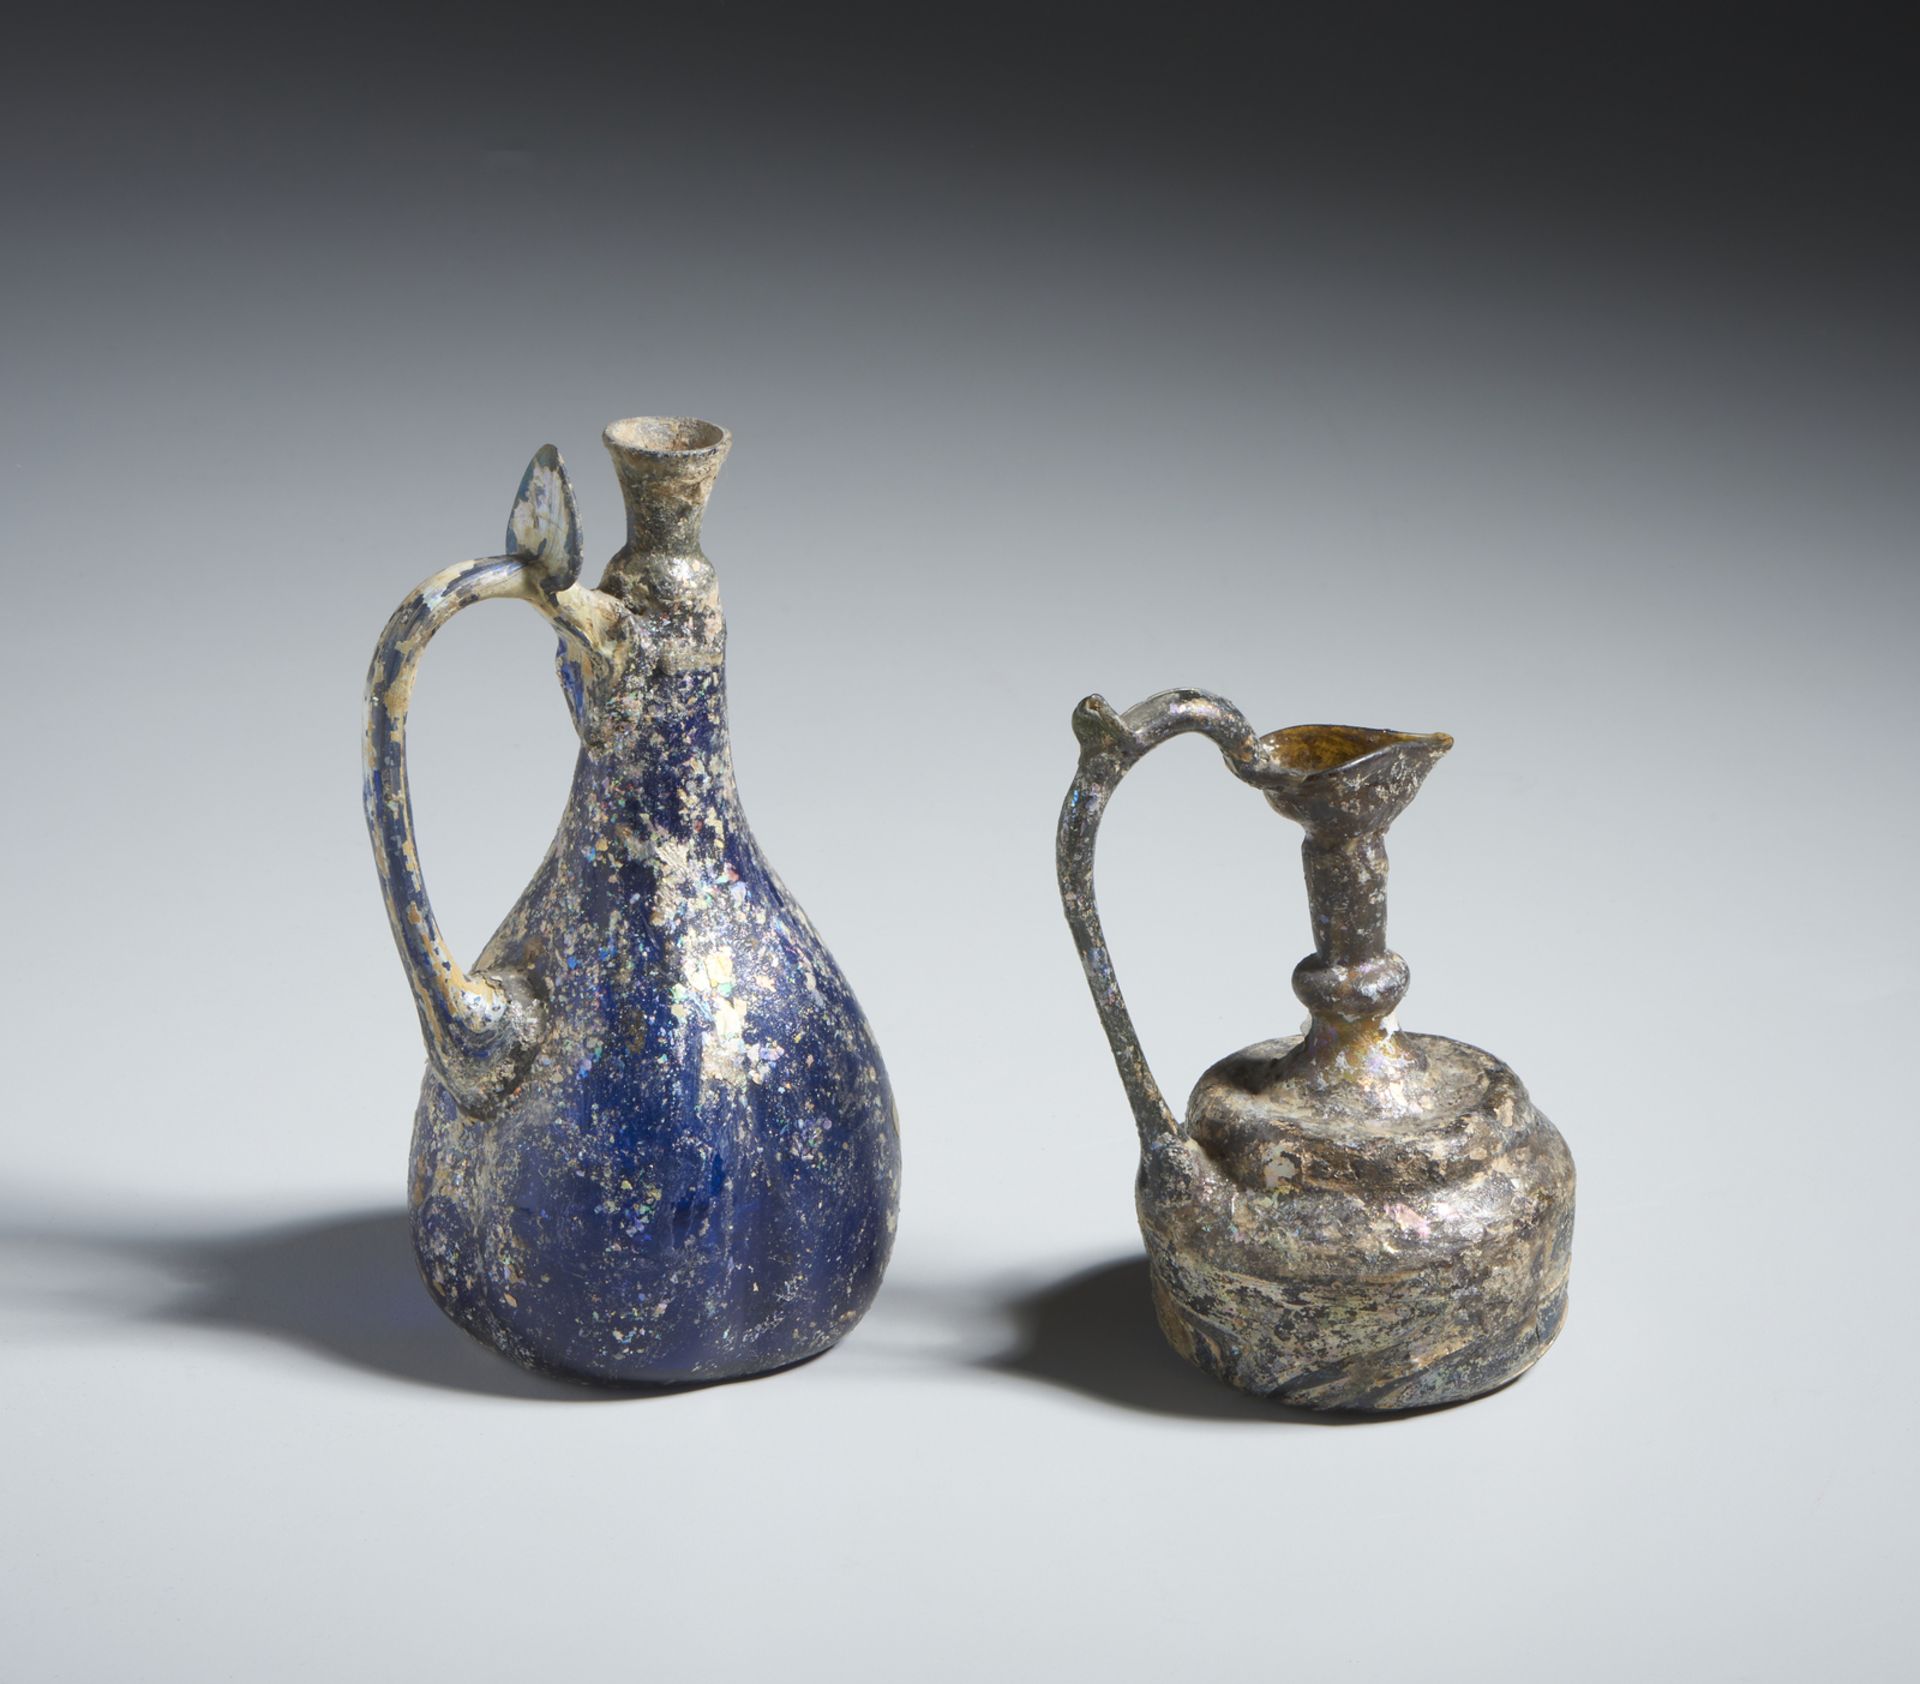 Two glass ewers Persia or Syria, 10th-12th century Cm 9,00 x 17,50 - Image 2 of 3